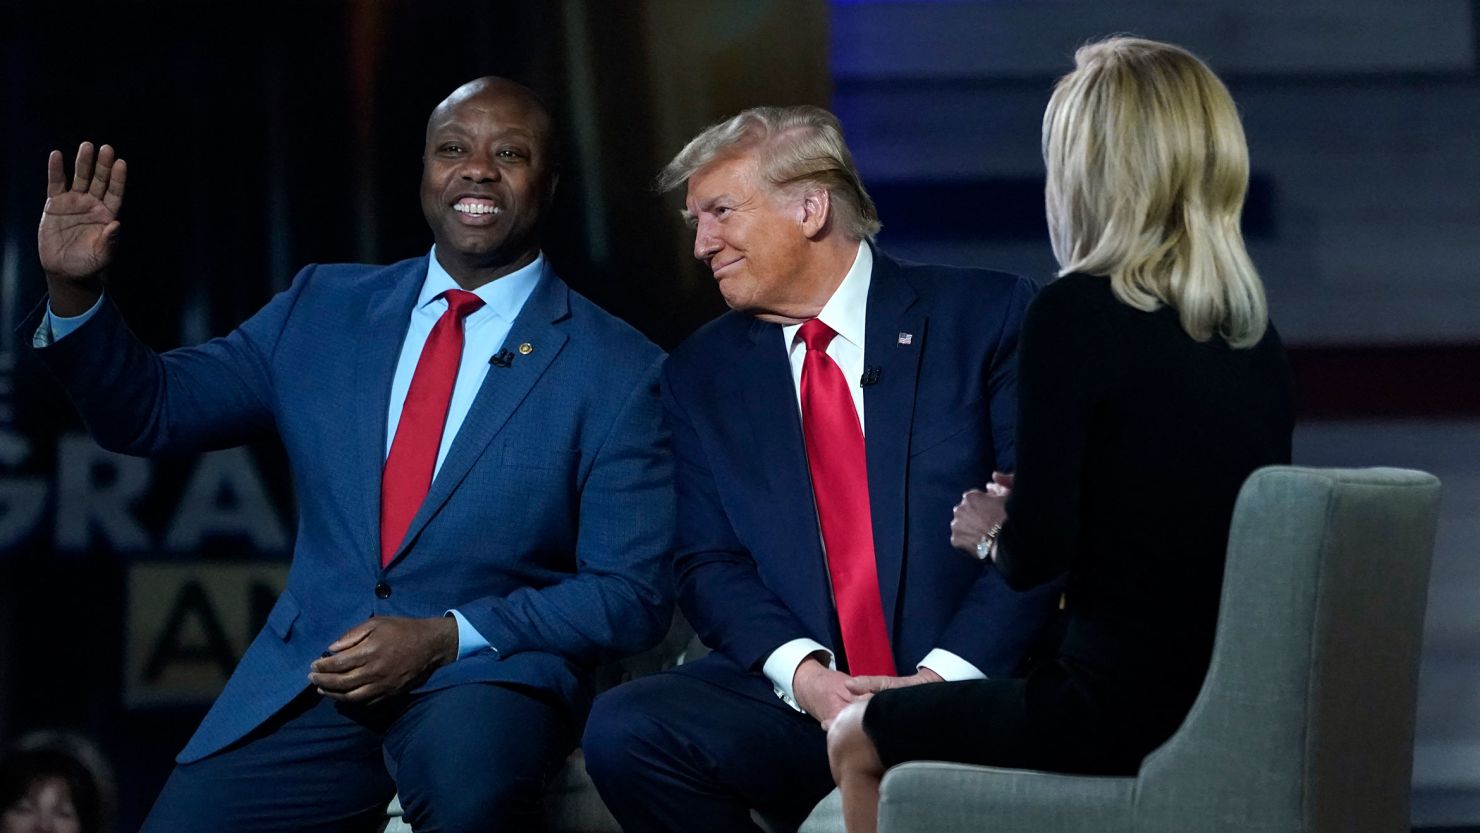 Sen. Tim Scott and former President Donald Trump participate in a Fox News Town Hall event with host Laura Ingraham at the Greenville Convention Center in Greenville, South Carolina, on February 20.